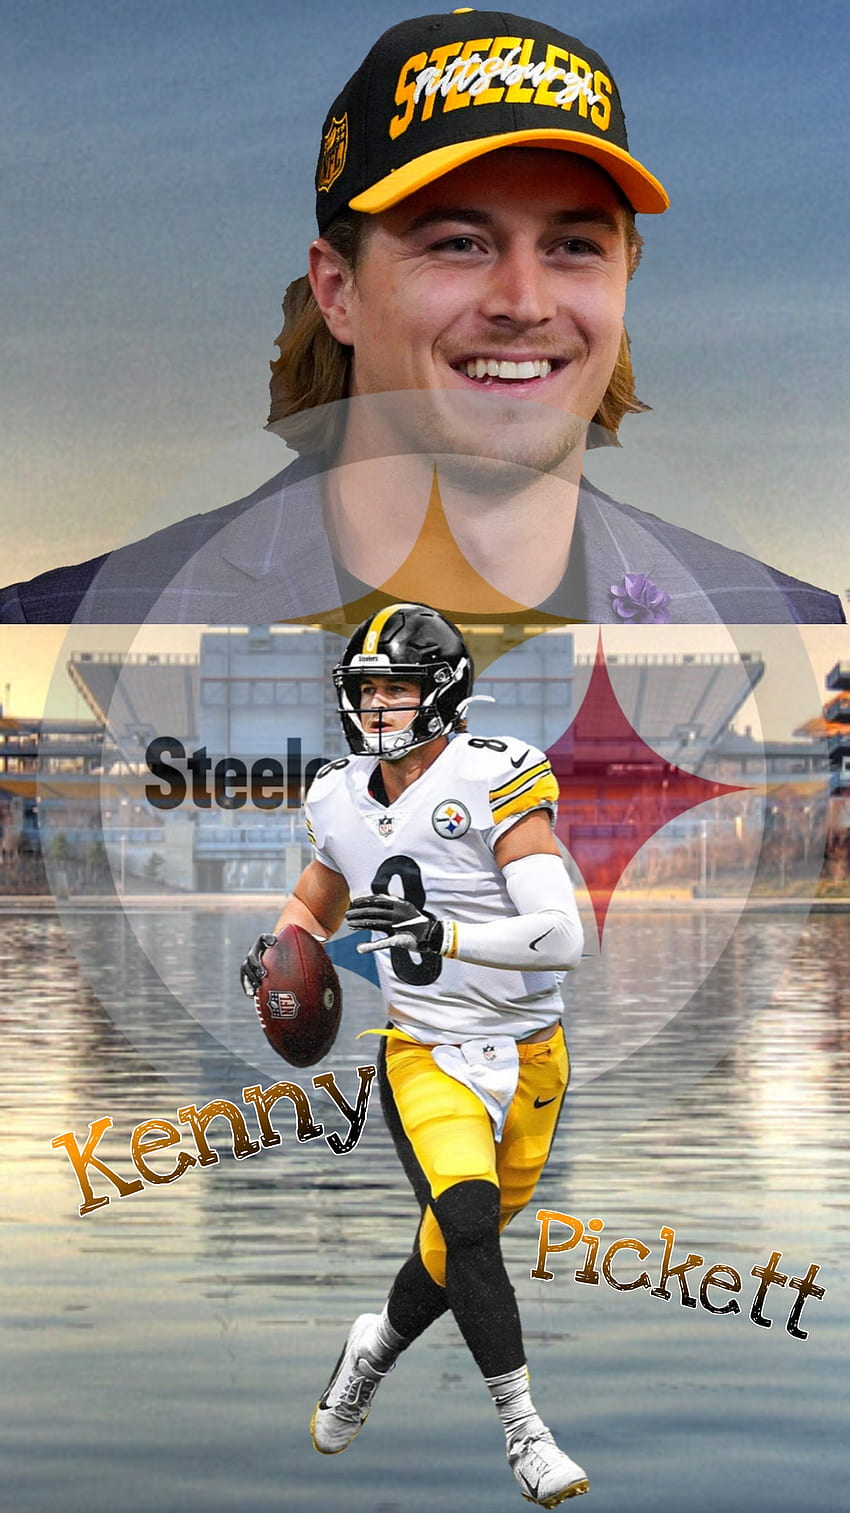 Check out the best preseason pics of Steelers QB Kenny Pickett